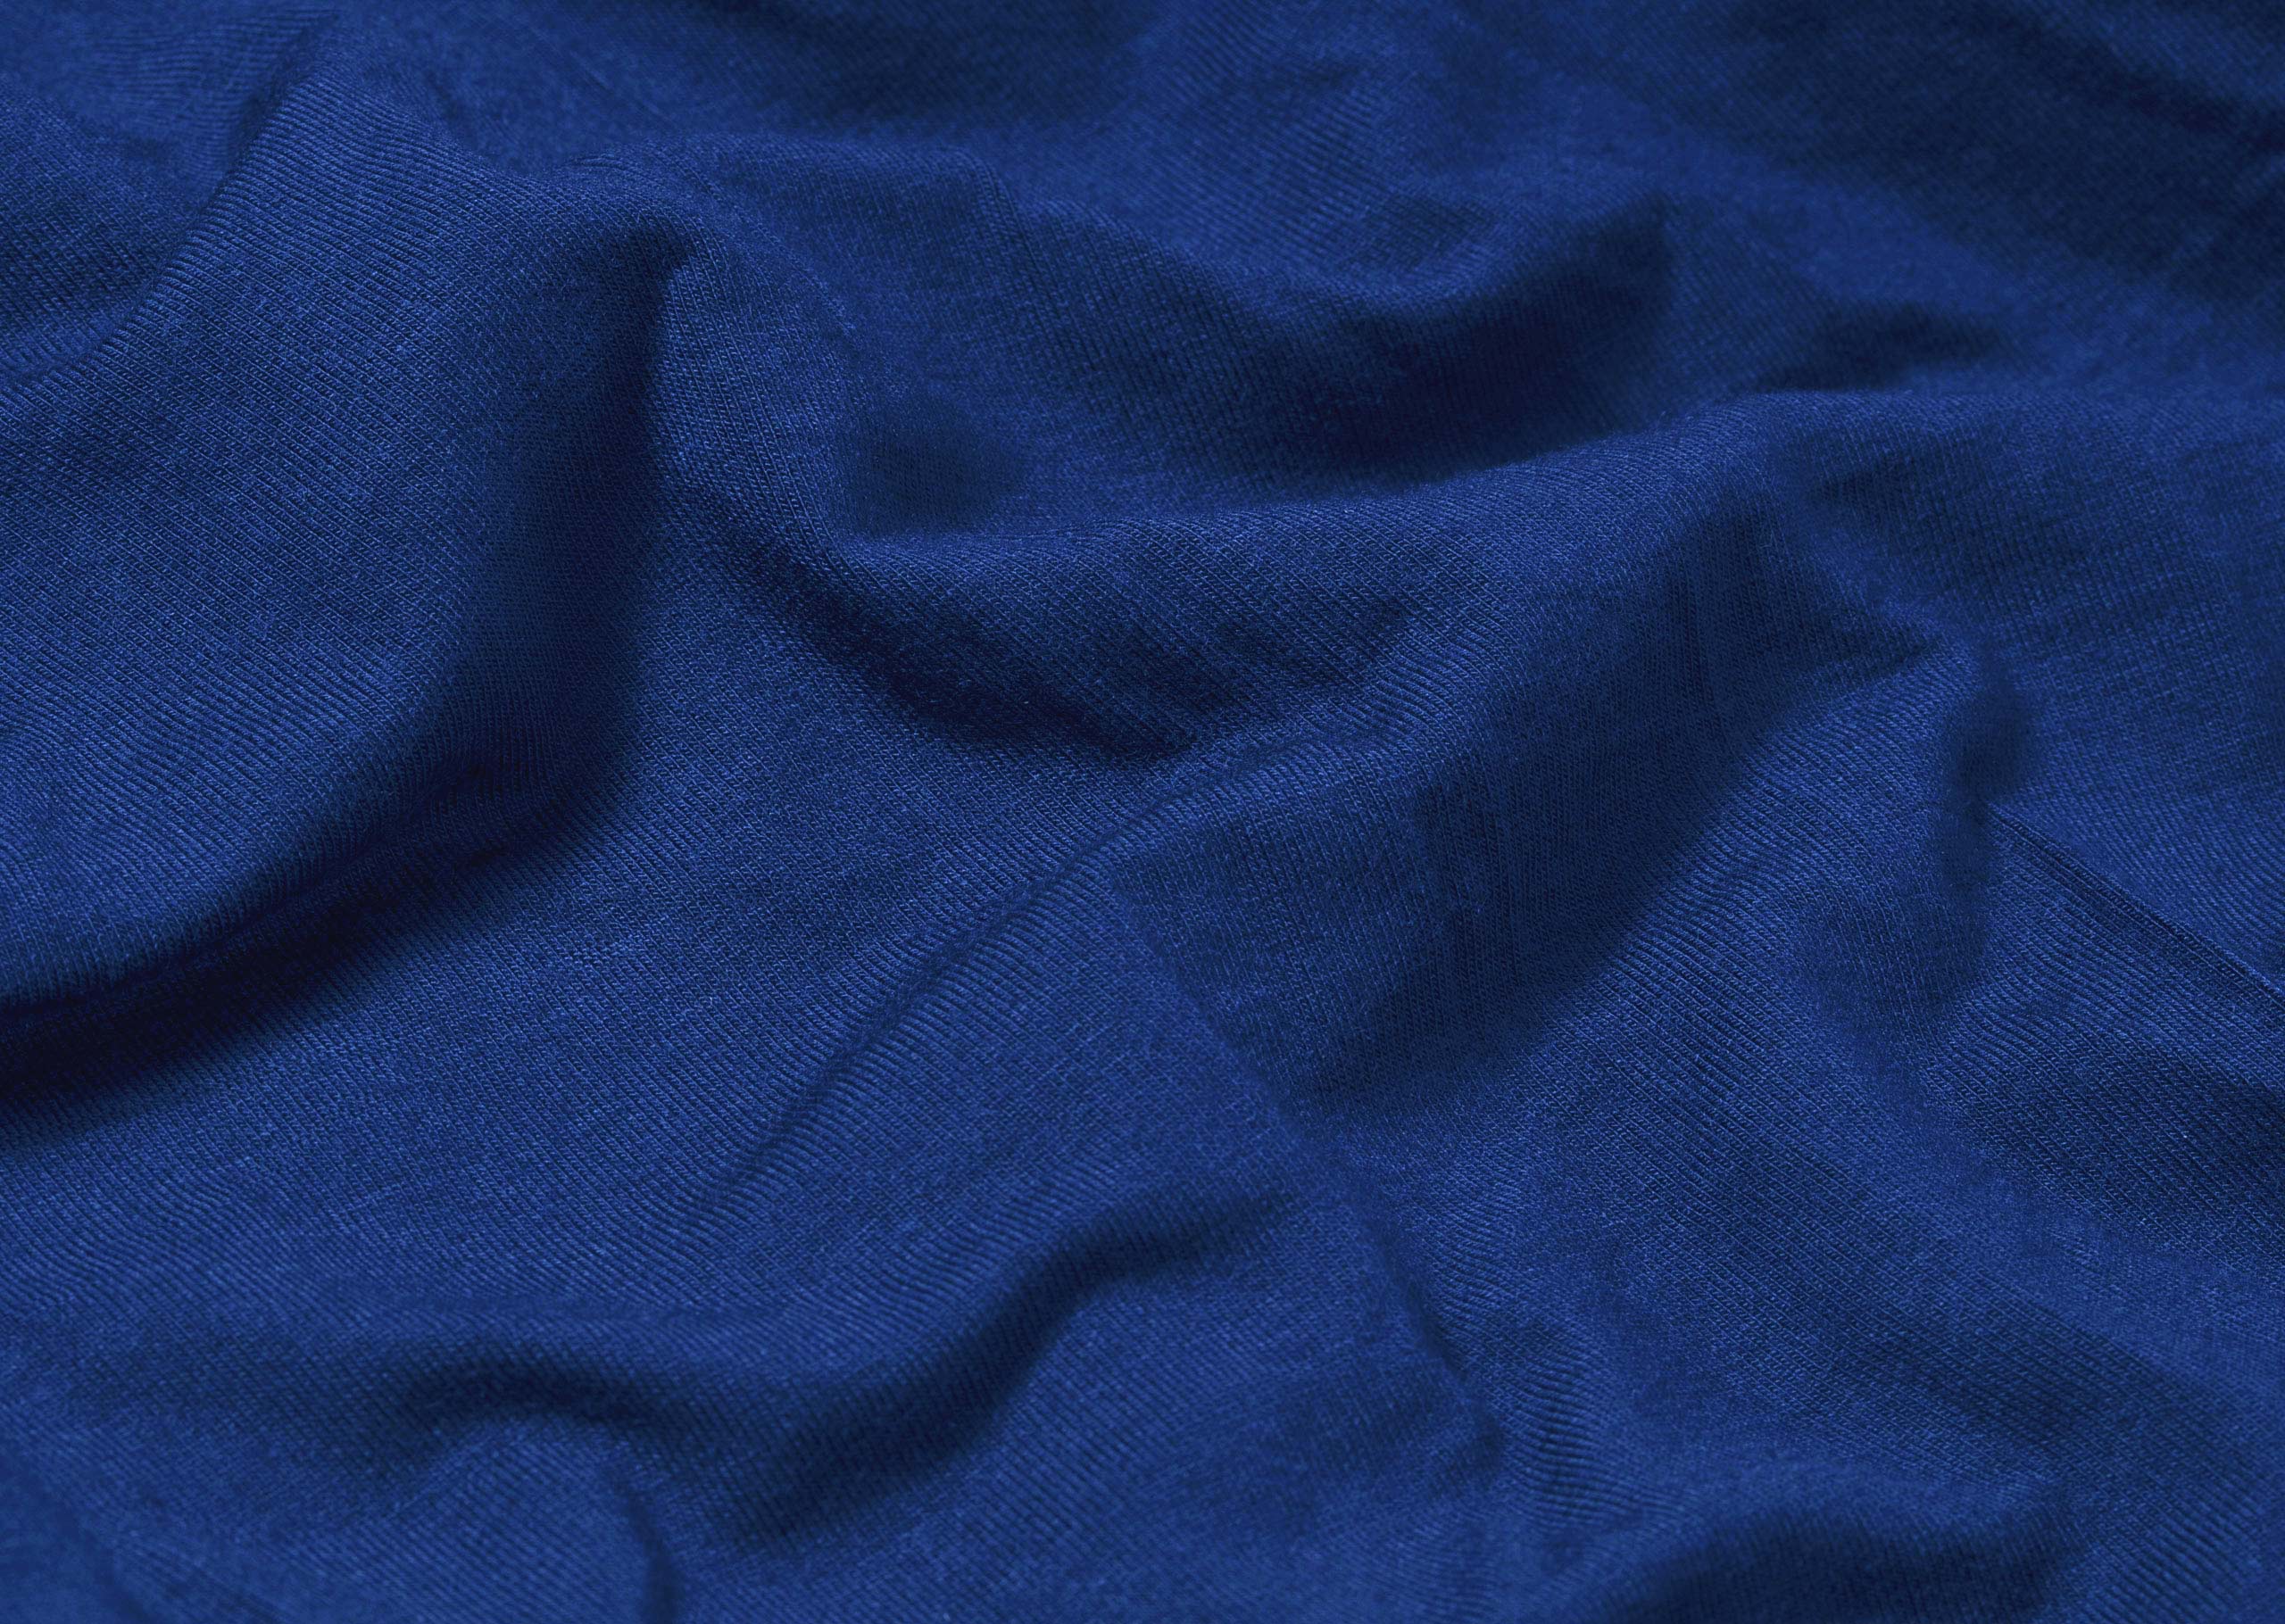 Close up detail shot of soft blue micromodal material.